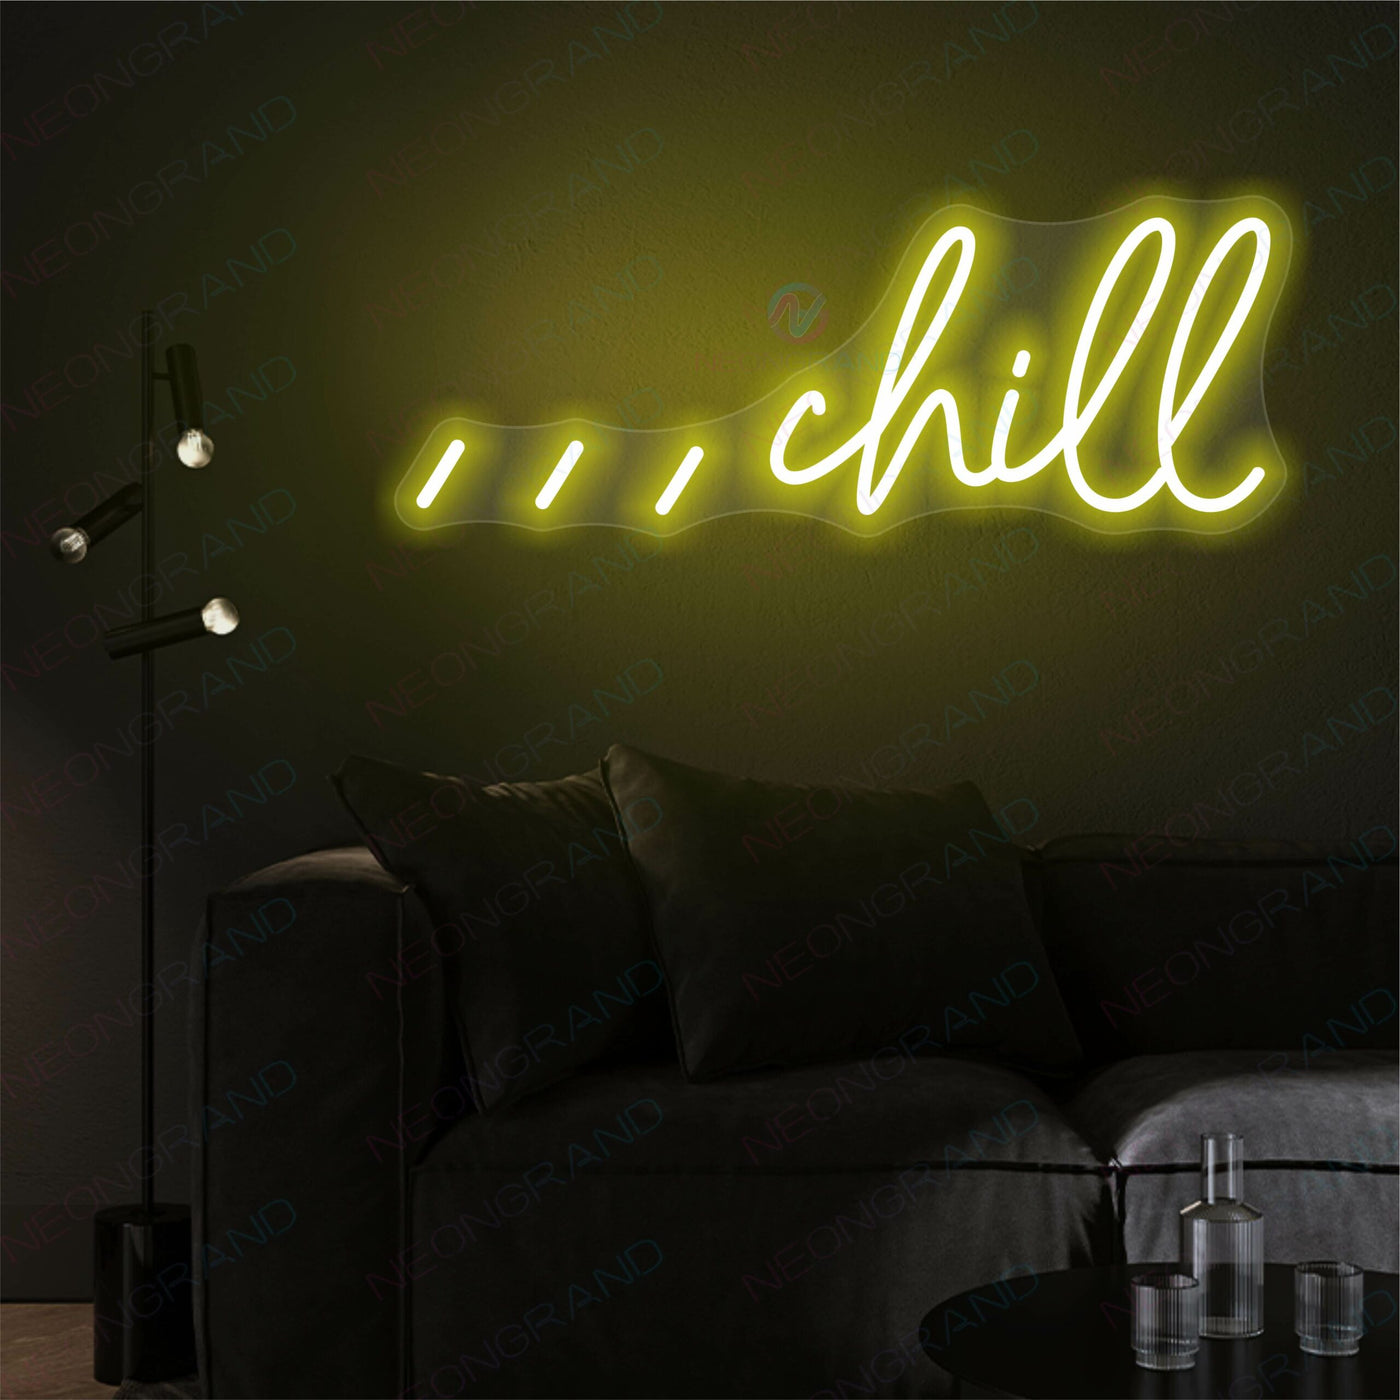 Chill Neon Sign Chill Vibe Led Light YELLOW